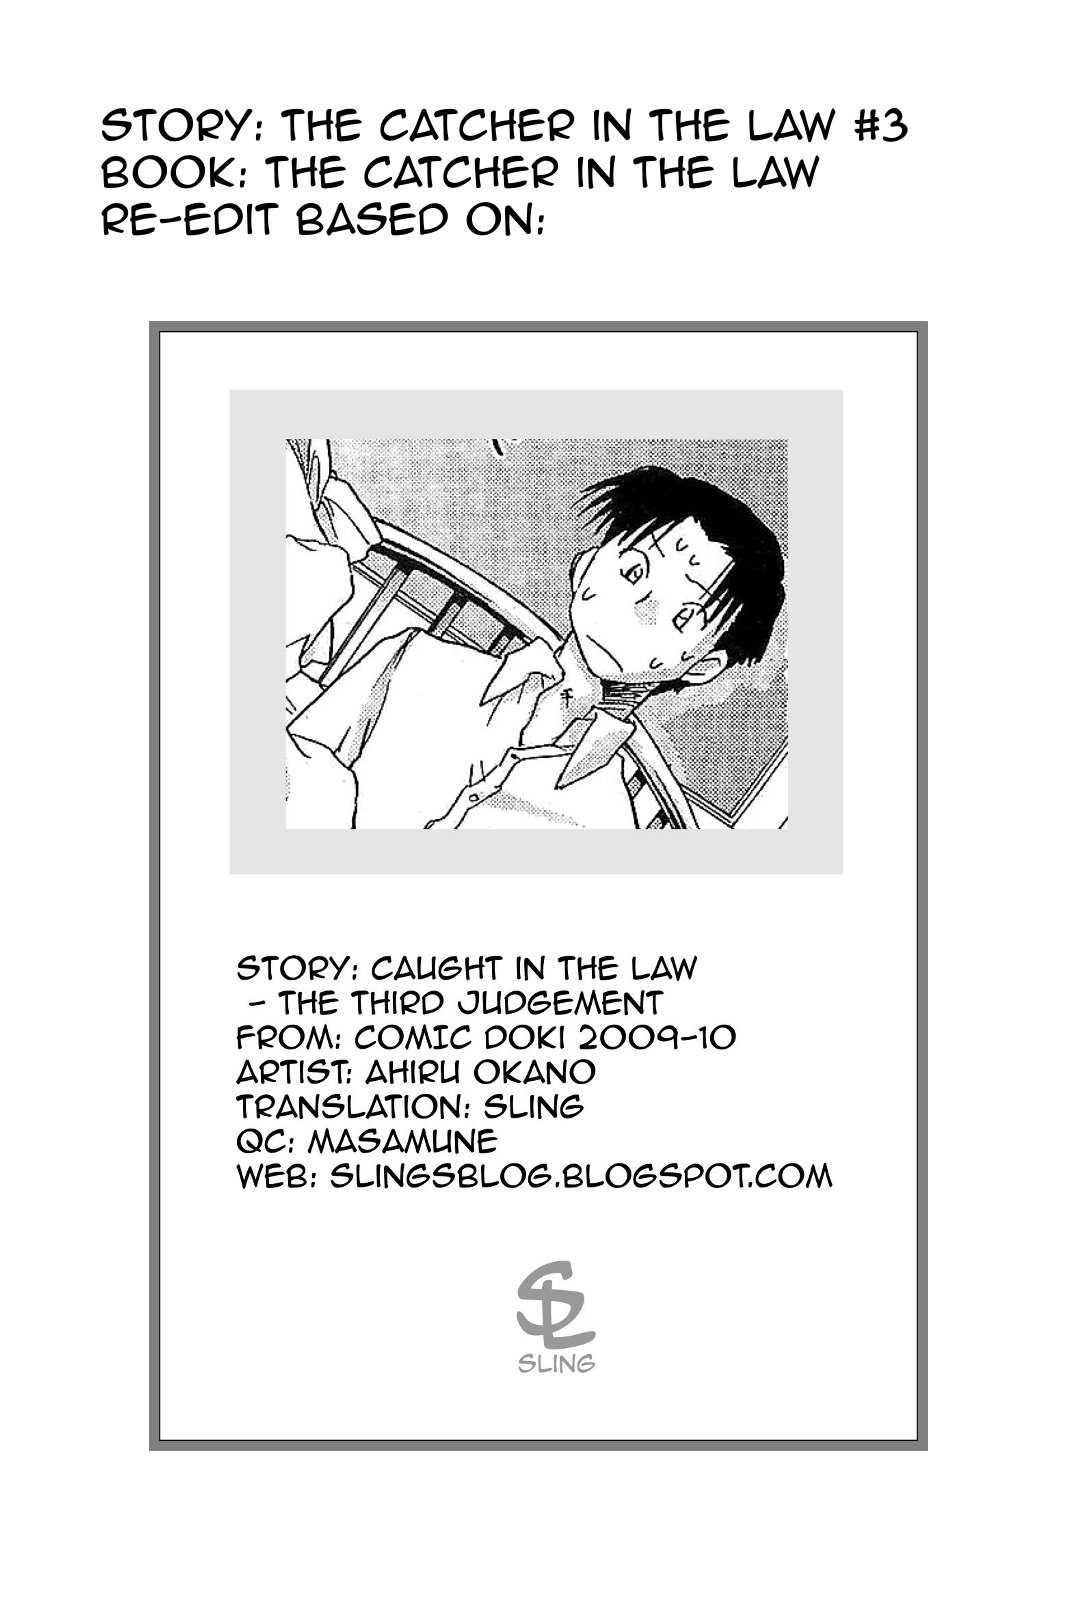 [Okano Ahiru] The Catcher in the Law chapter 3 re-edit [English] [Sling] 